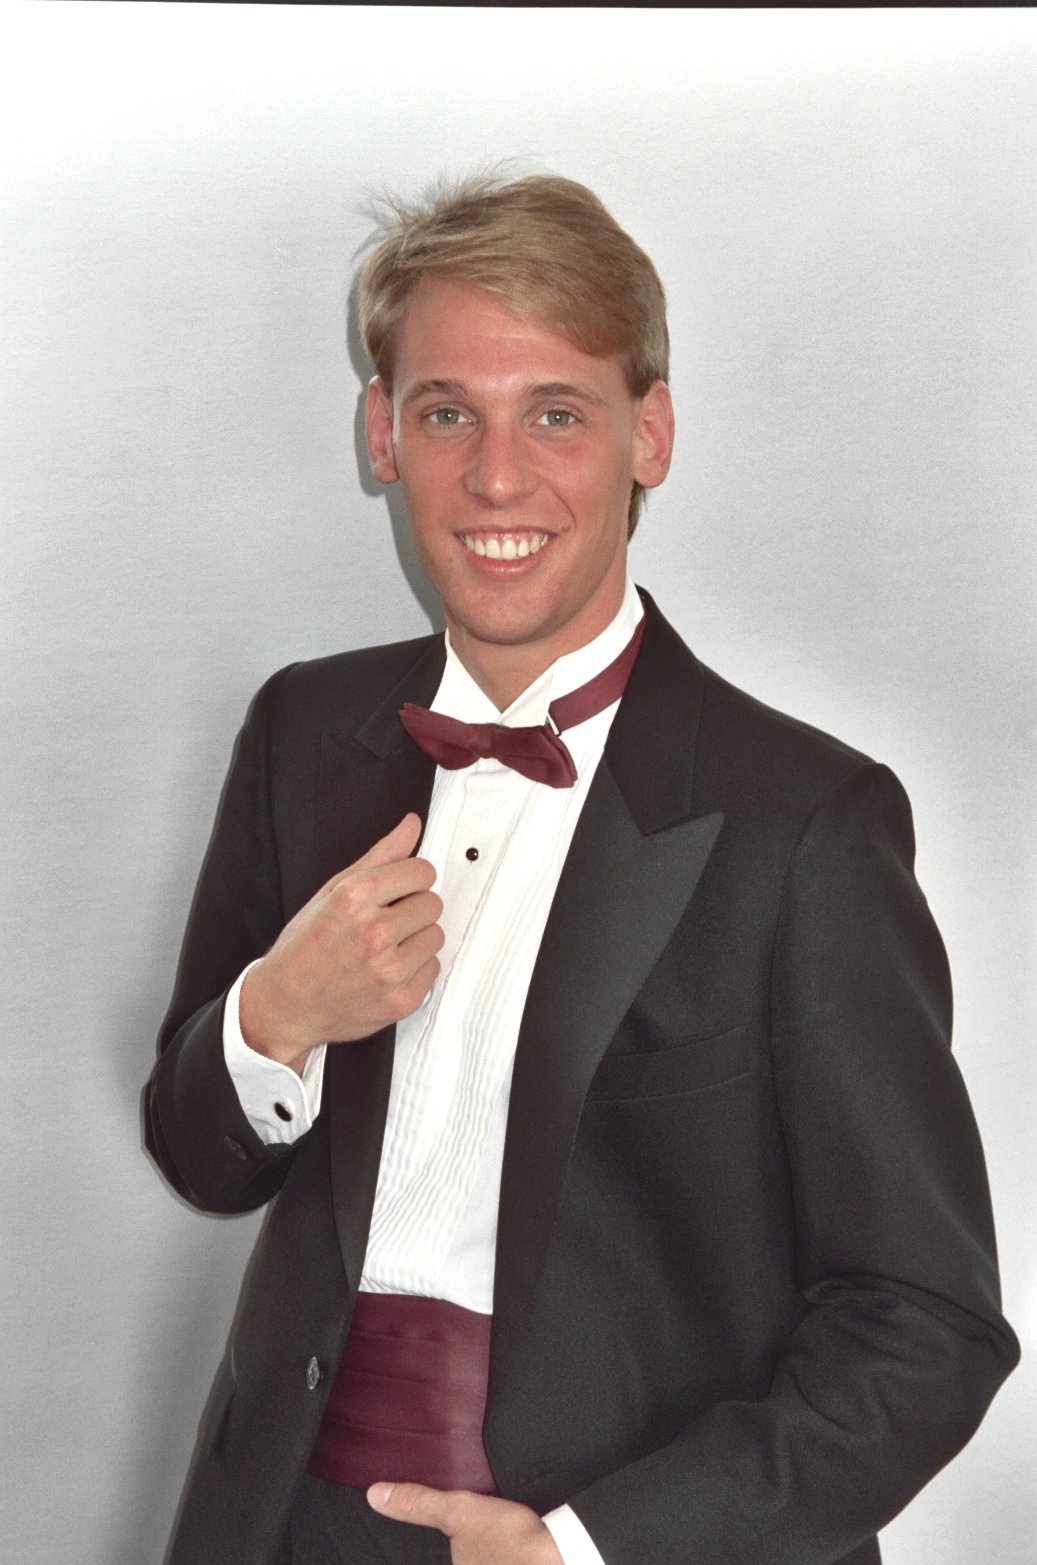 man in tuxedo smiling and pointing finger at shirt